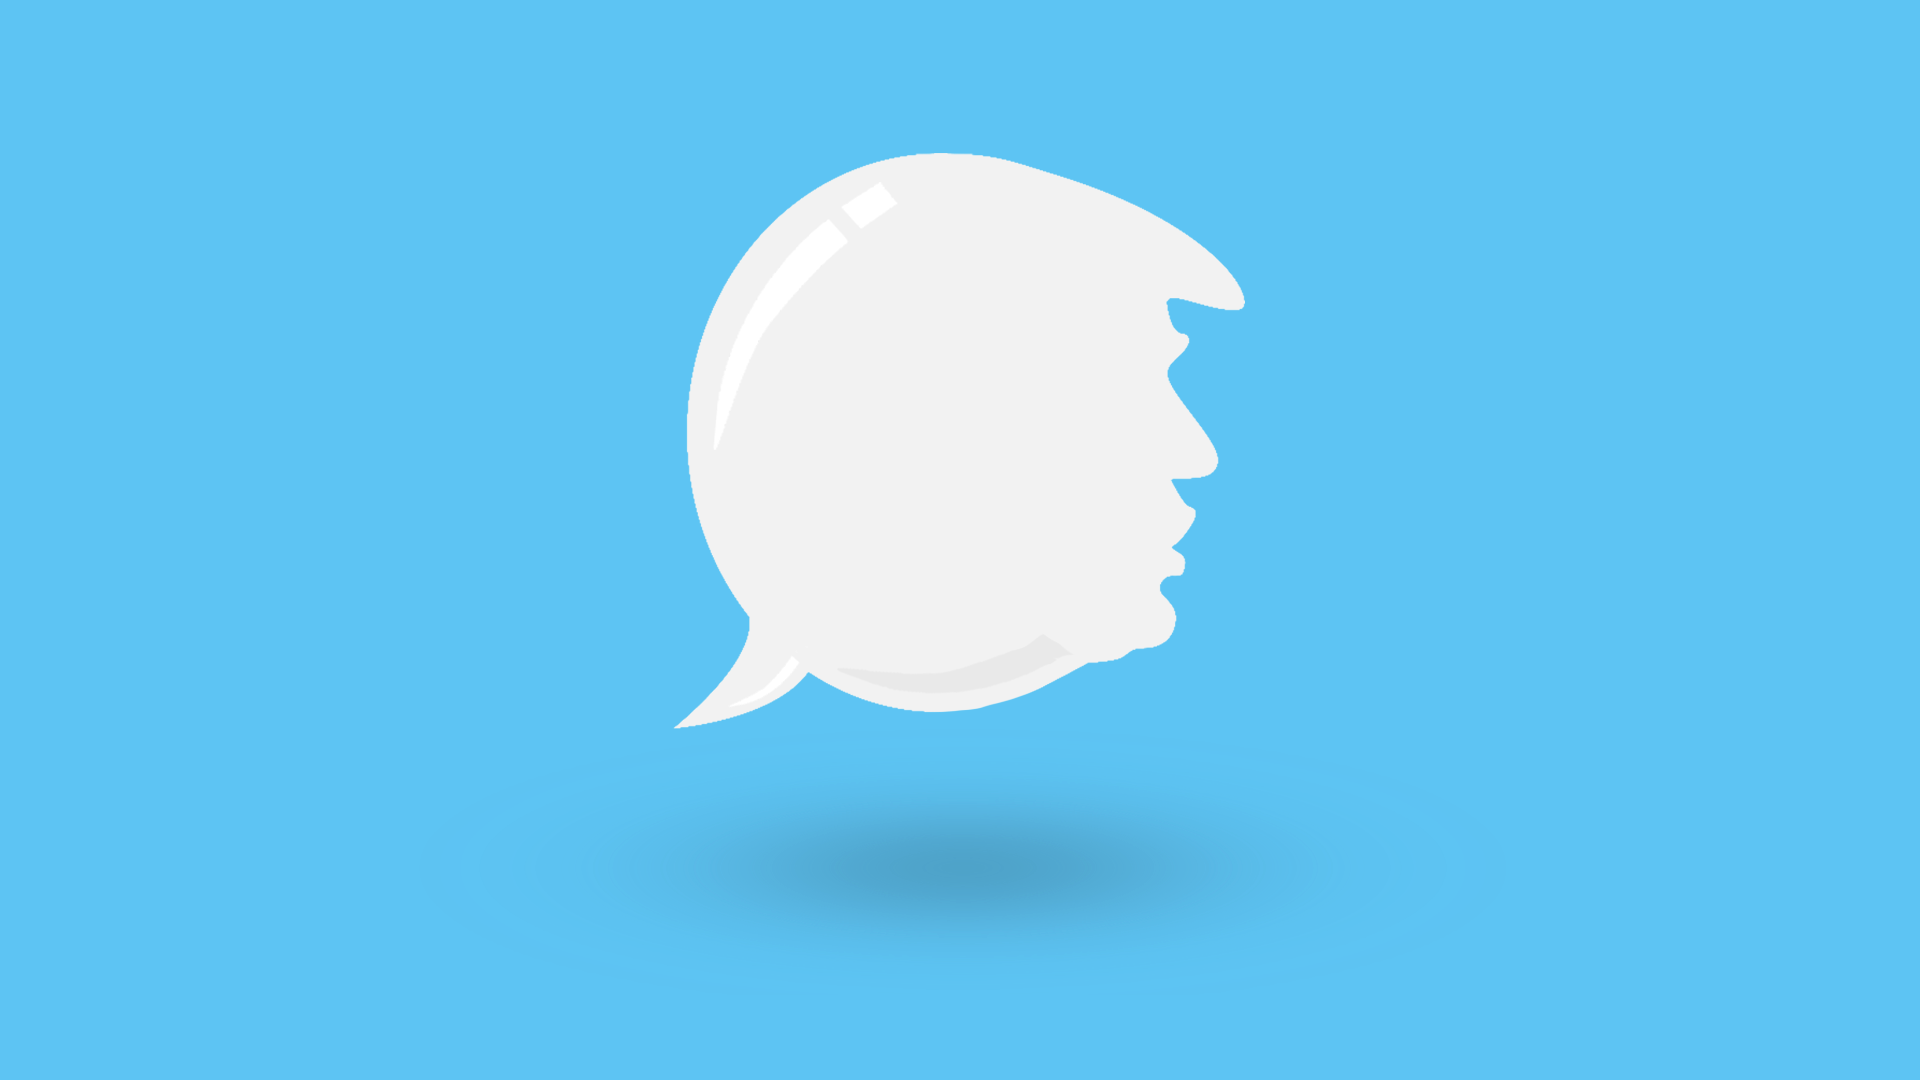 Illustration of a speech bubble in the shape of President Trump's head